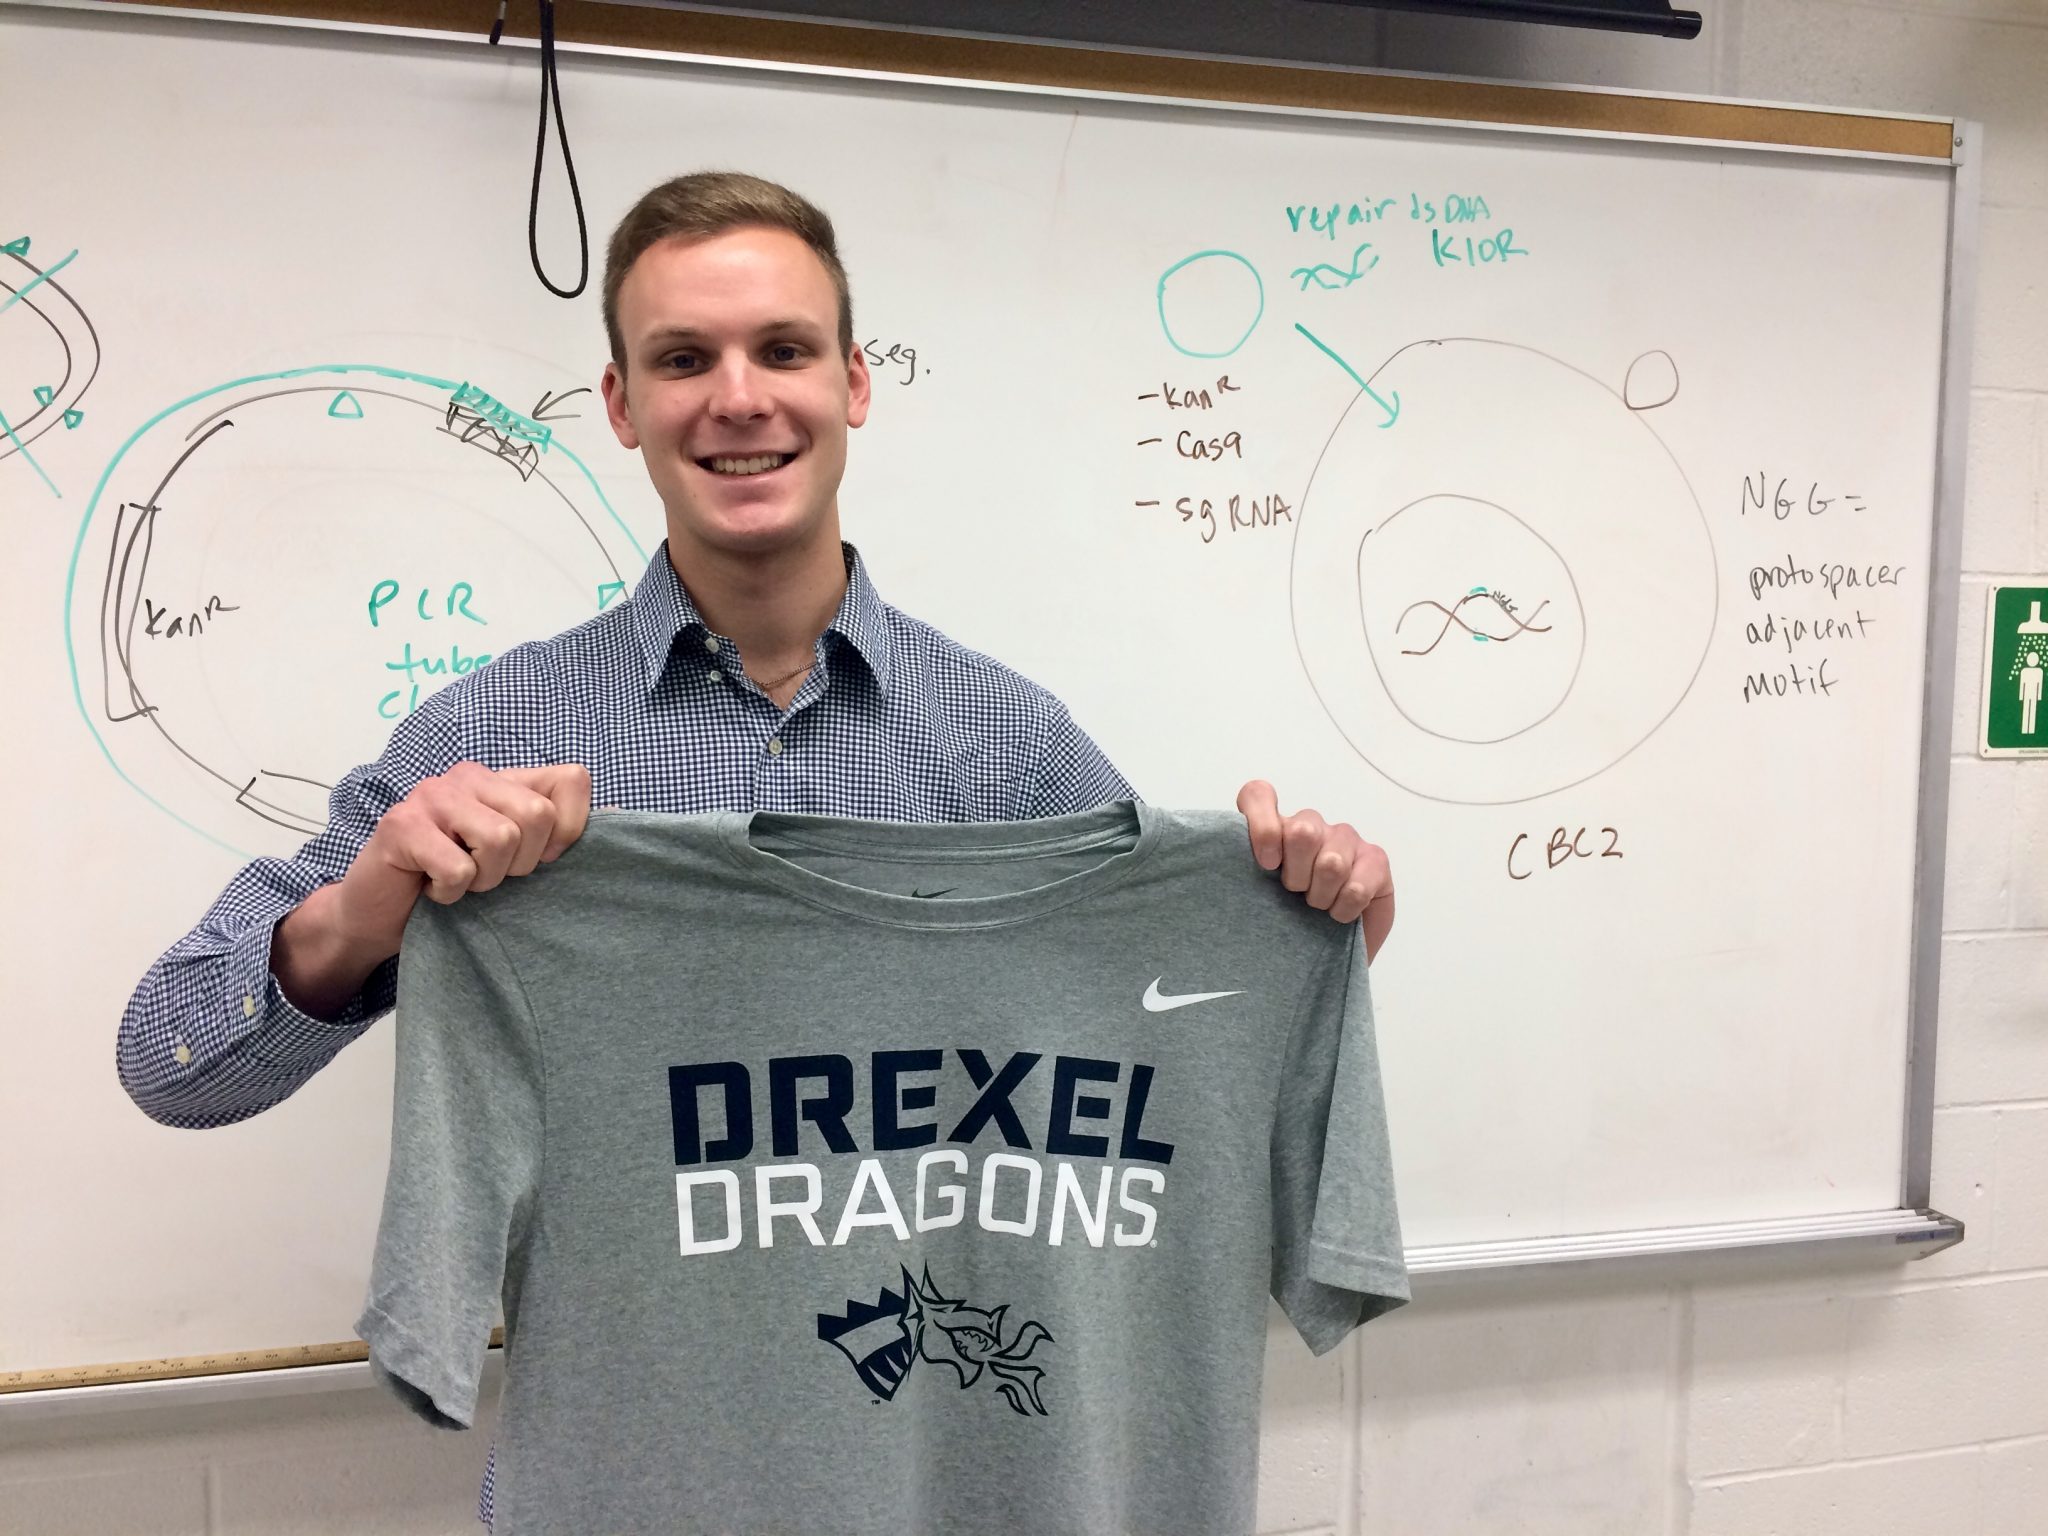 Andrew Arner is smiling in front of a whiteboard with notes and diagrams. He is holding a grey shirt that reads, "Drexel Dragons."